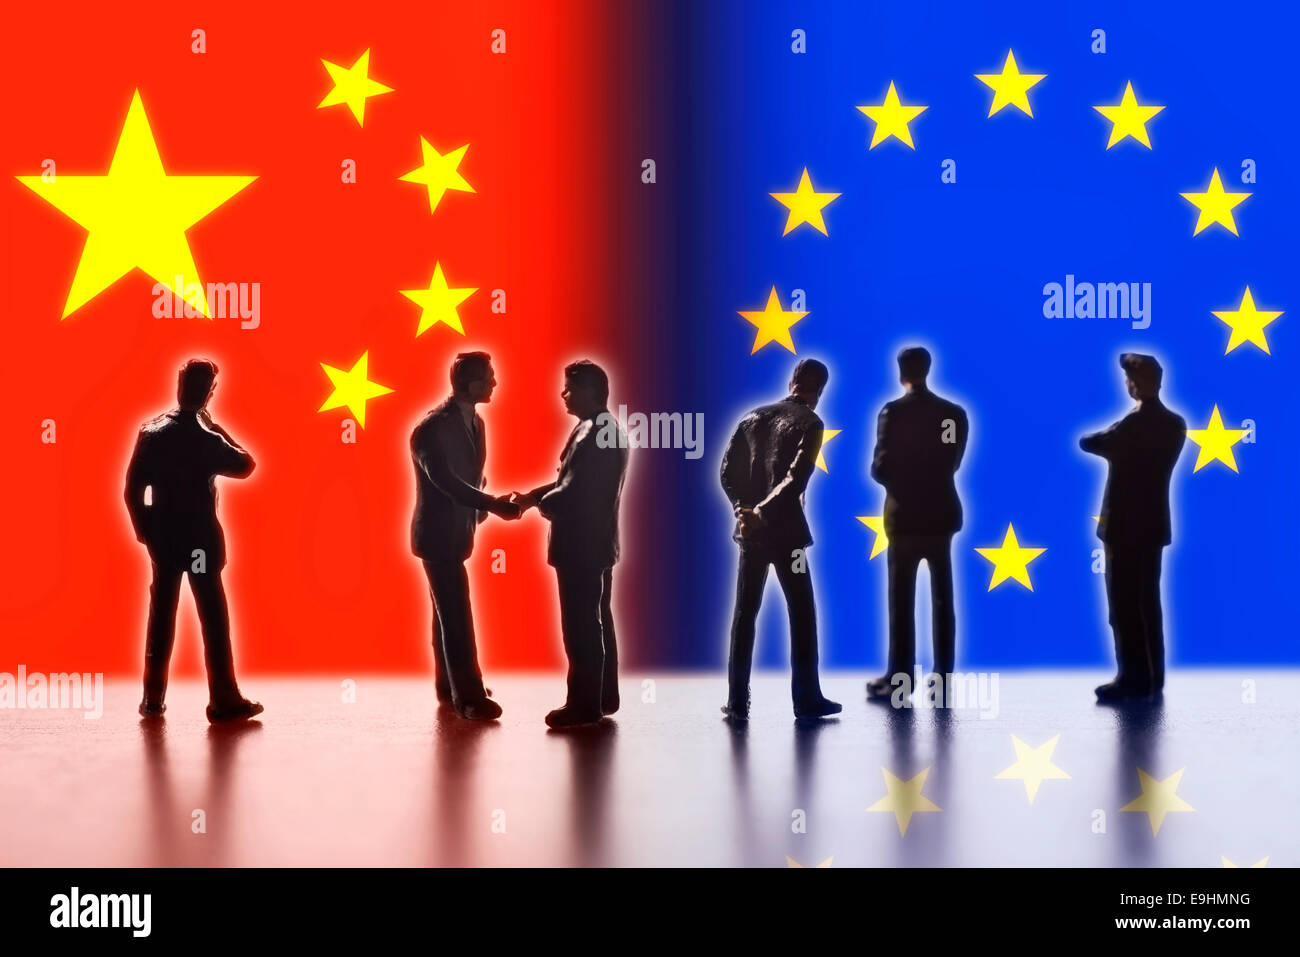 Model figures symbolizing the politicians are faced with the flags of China and the EU. Two of them shake hands. Digital Composite (DC) Stock Photo